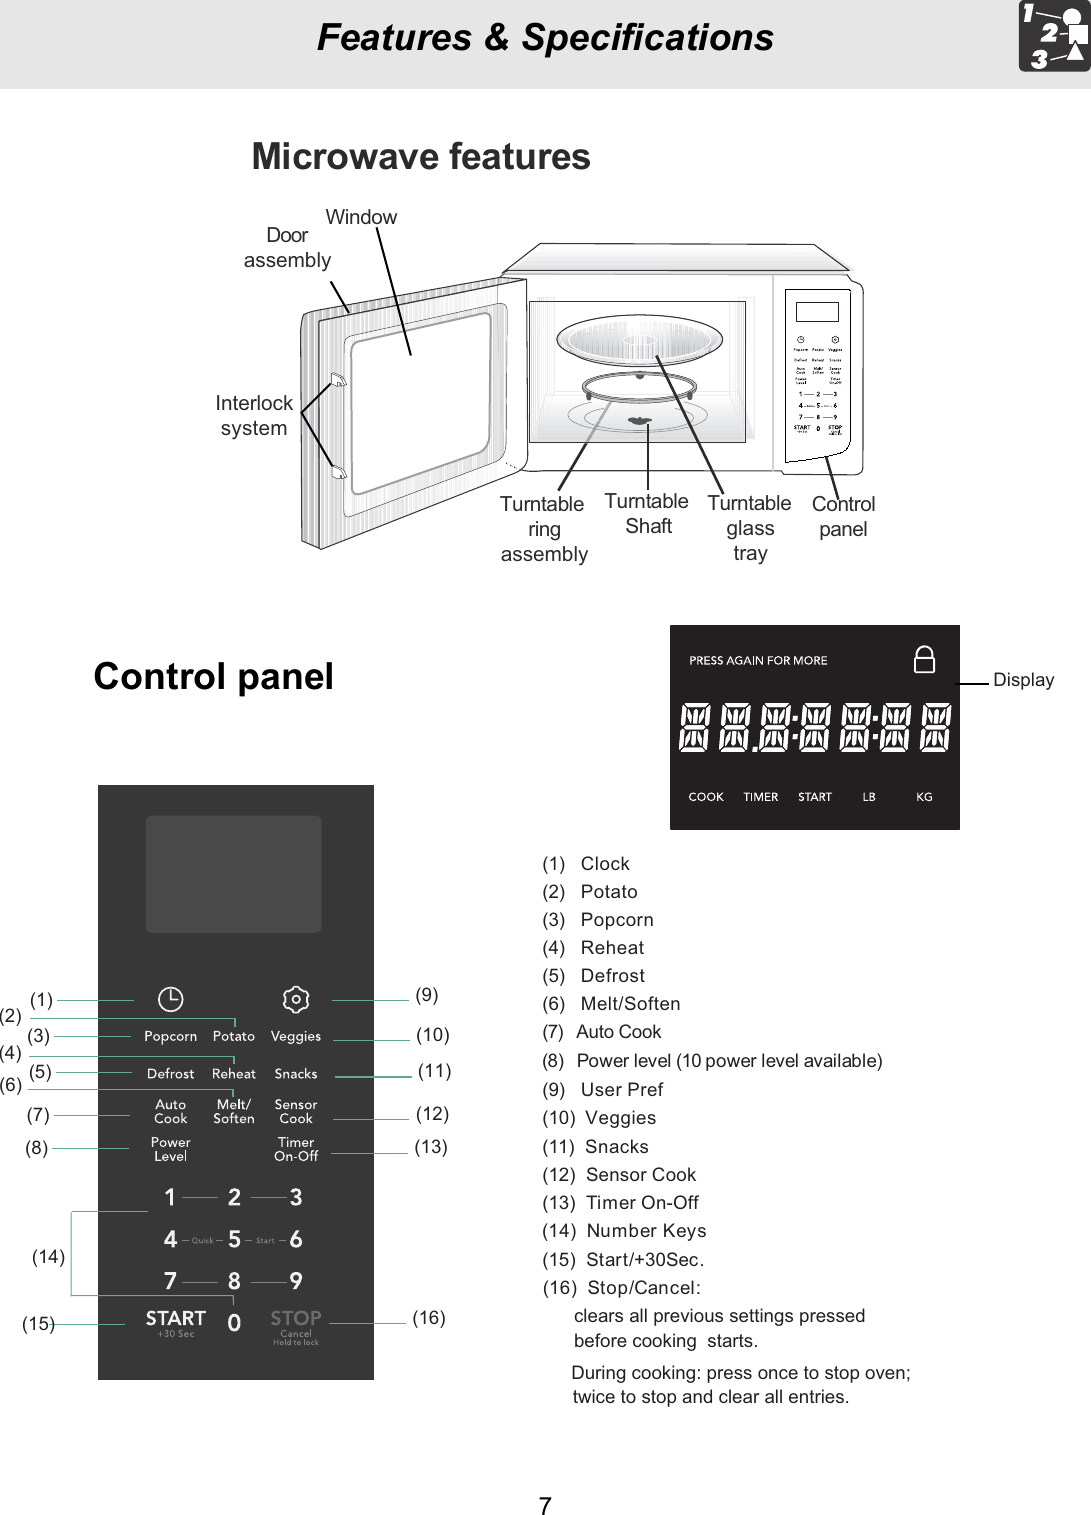 Features &amp; SpecificationsControl panelMicrowave featuresTurntableringassemblyTurntableglasstrayDoorassemblyInterlocksystemTurntableShaftControlpanelWindow7(3)(5)(7)(8)(10)(11)(12)(13)(1) (9)(14)(15) (1 )(2)(4)(6)6(1)   (2)   (3)   Popcorn(4)   (5)   (6)   Melt/Soften(16)  Stop/Cancel: (9)   User Pref(10)  (12)  Sensor Cook(13)  Timer(7)   Auto Cookclears all previous settings pressed       During cooking: press once to stop oven; clear all entries.(11)  Snacksbefore cooking  starts.    twice to stop and ClockPotatoReheatDefrost(8)   Power level (10 power level available)Veggies On-Off(14)  Number Keys(15)  Start/+30Sec. Display